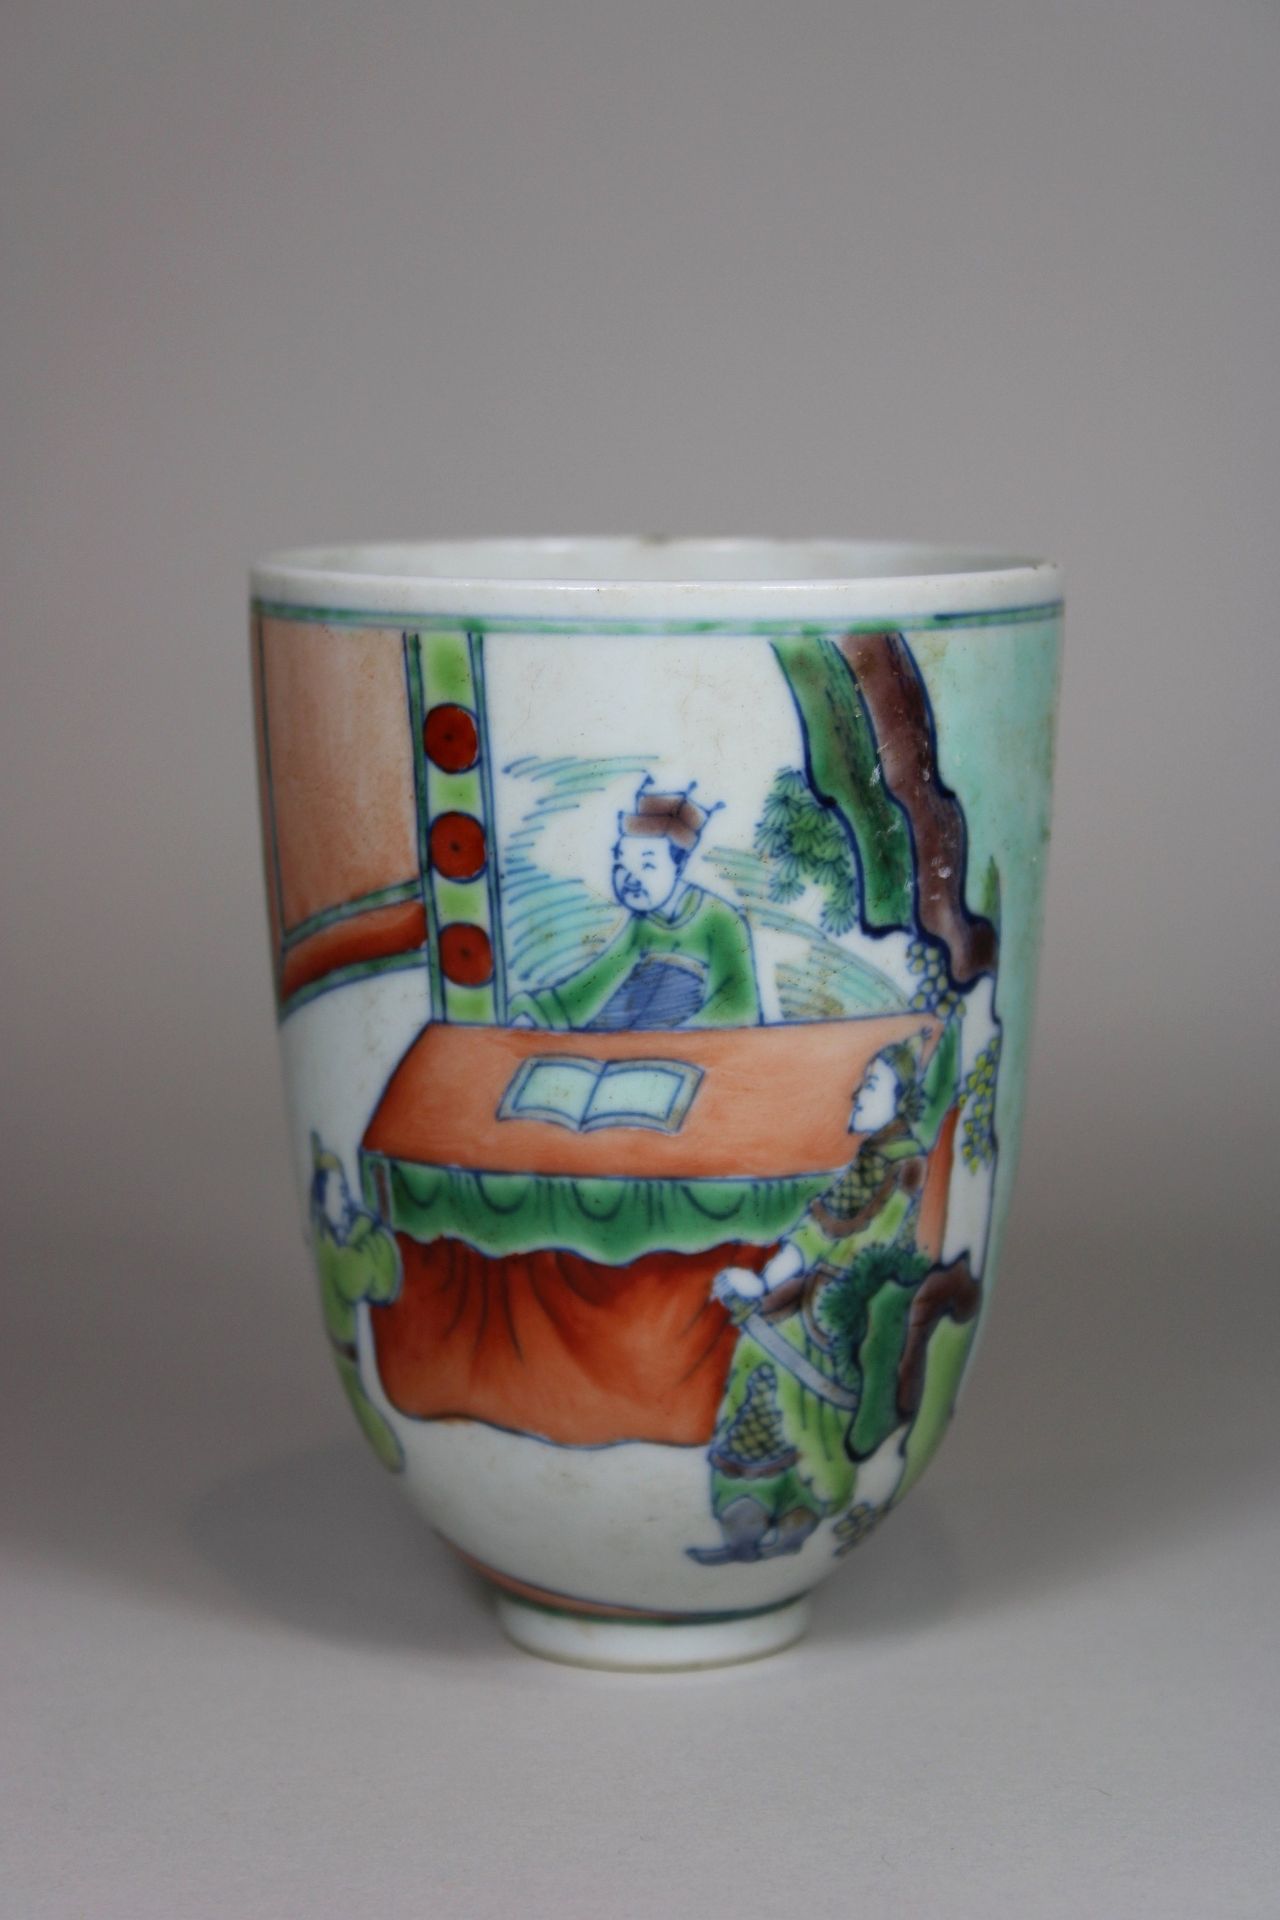 Teacup, China, Ming Dynastie - Image 5 of 5